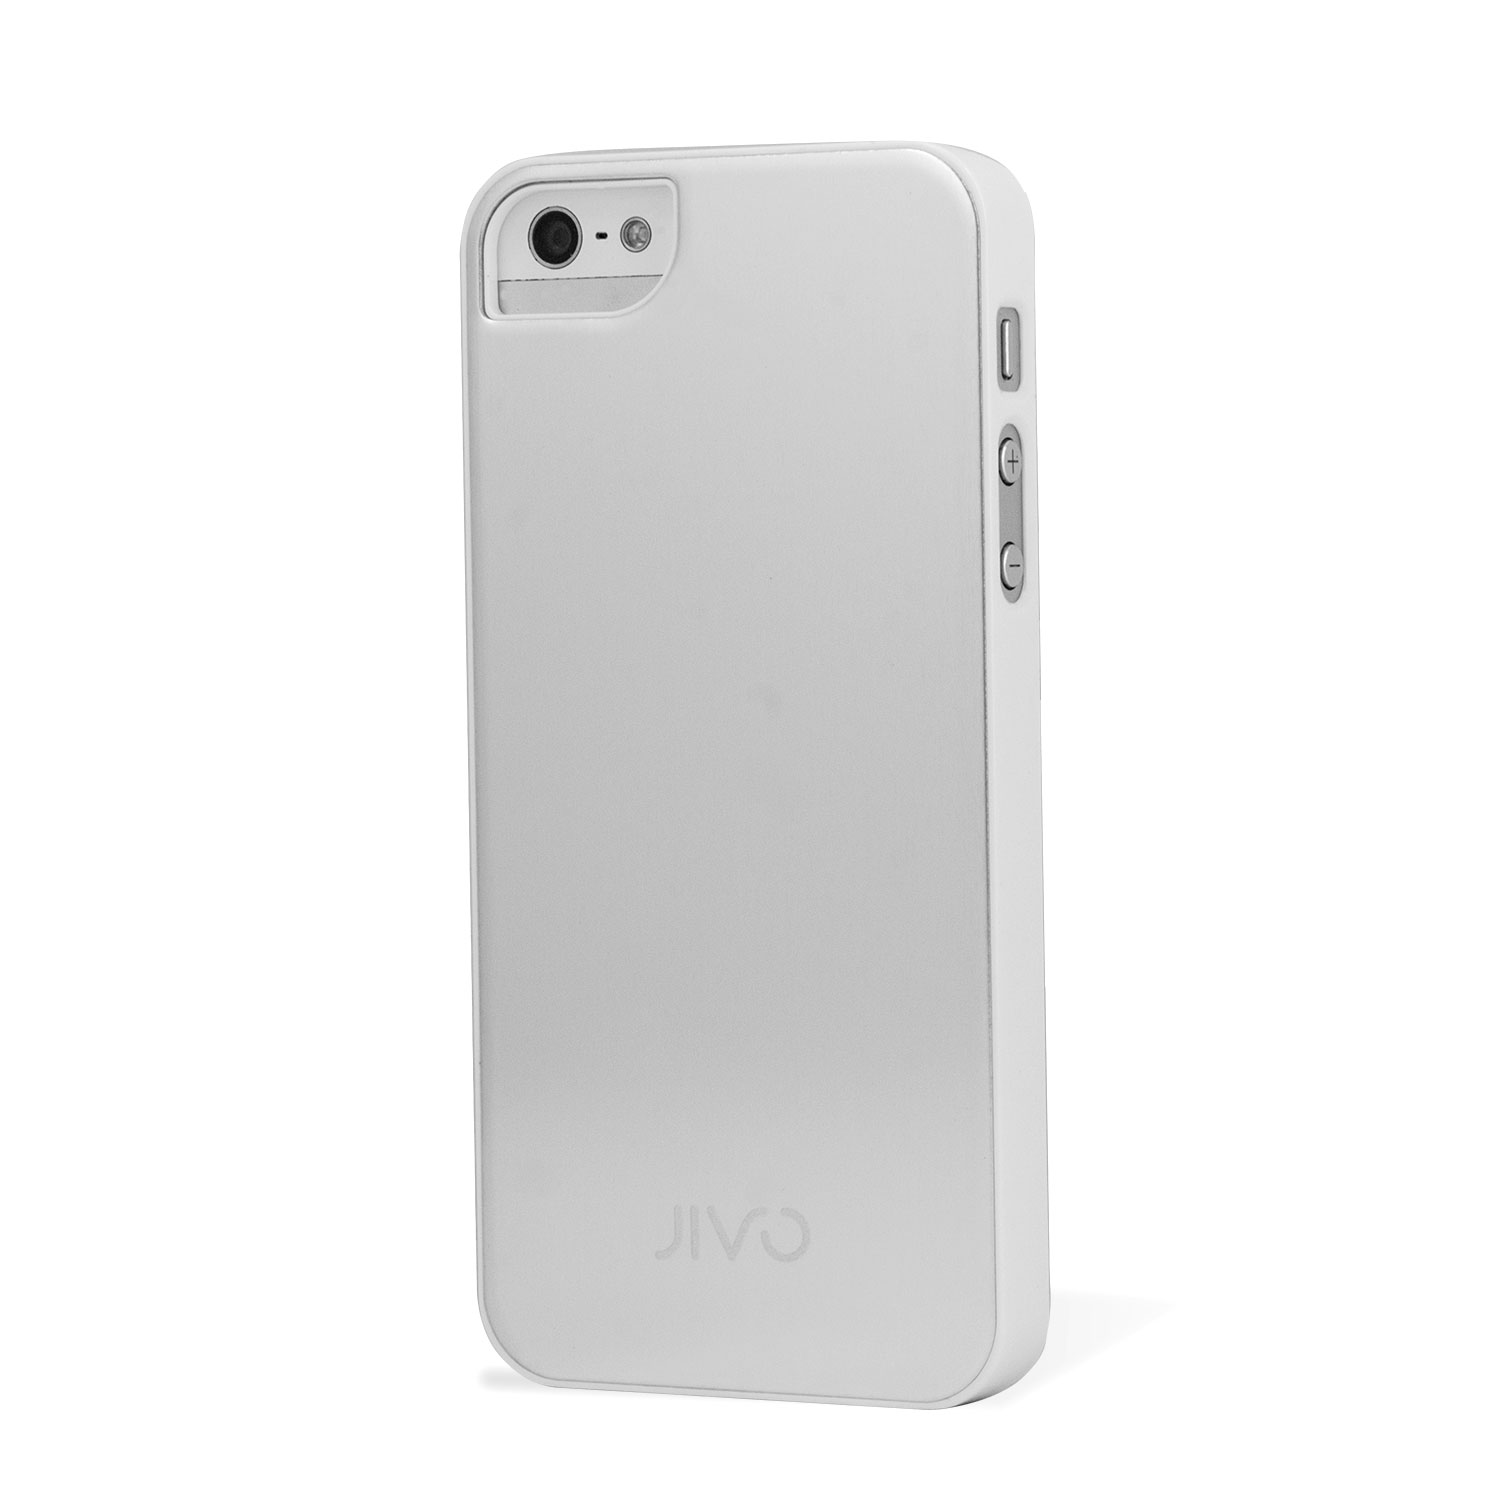 Jivo iPhone 5 "Alu-Case" One-Piece Snap-On iPhone Case - Silver